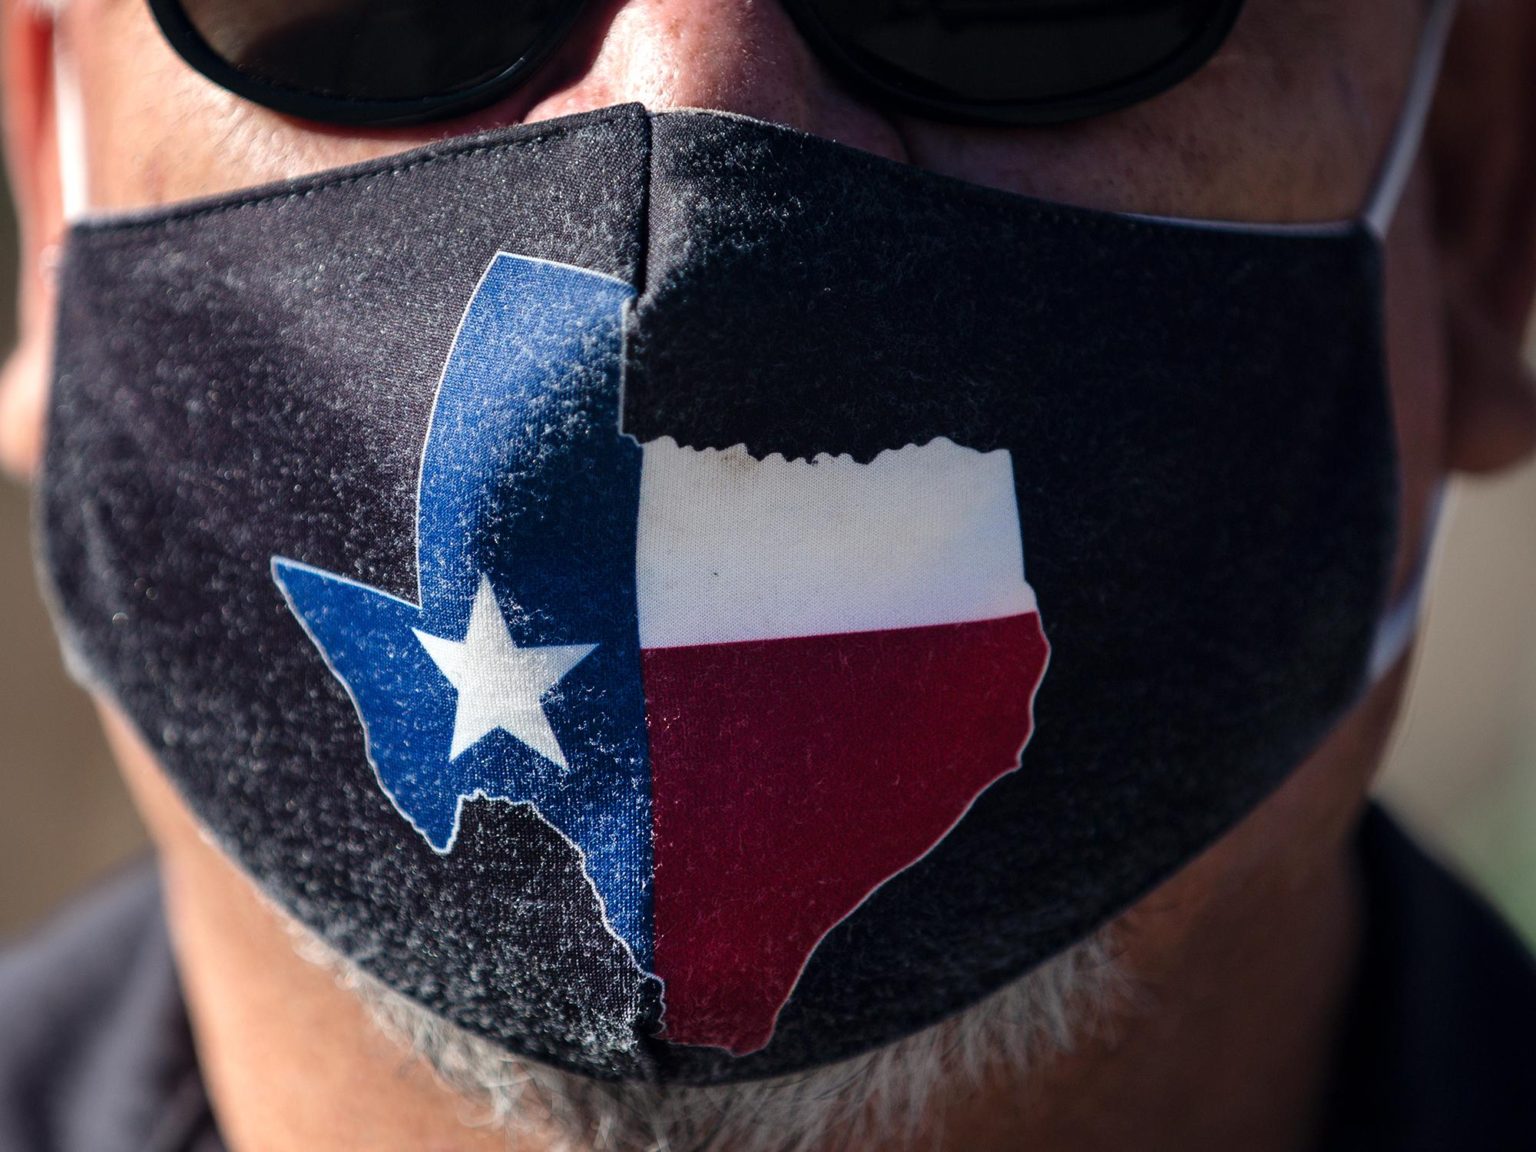 San Jose Hotel engineering manager Rocky Ontiveros, 60, wears a Texas mask on March 3, 2021 in Austin, Texas. Gov. Greg Abbott announced a new executive order that will end the statewide mask mandate and allow businesses to reopen at 100 percent capacity on March 10, 2021.